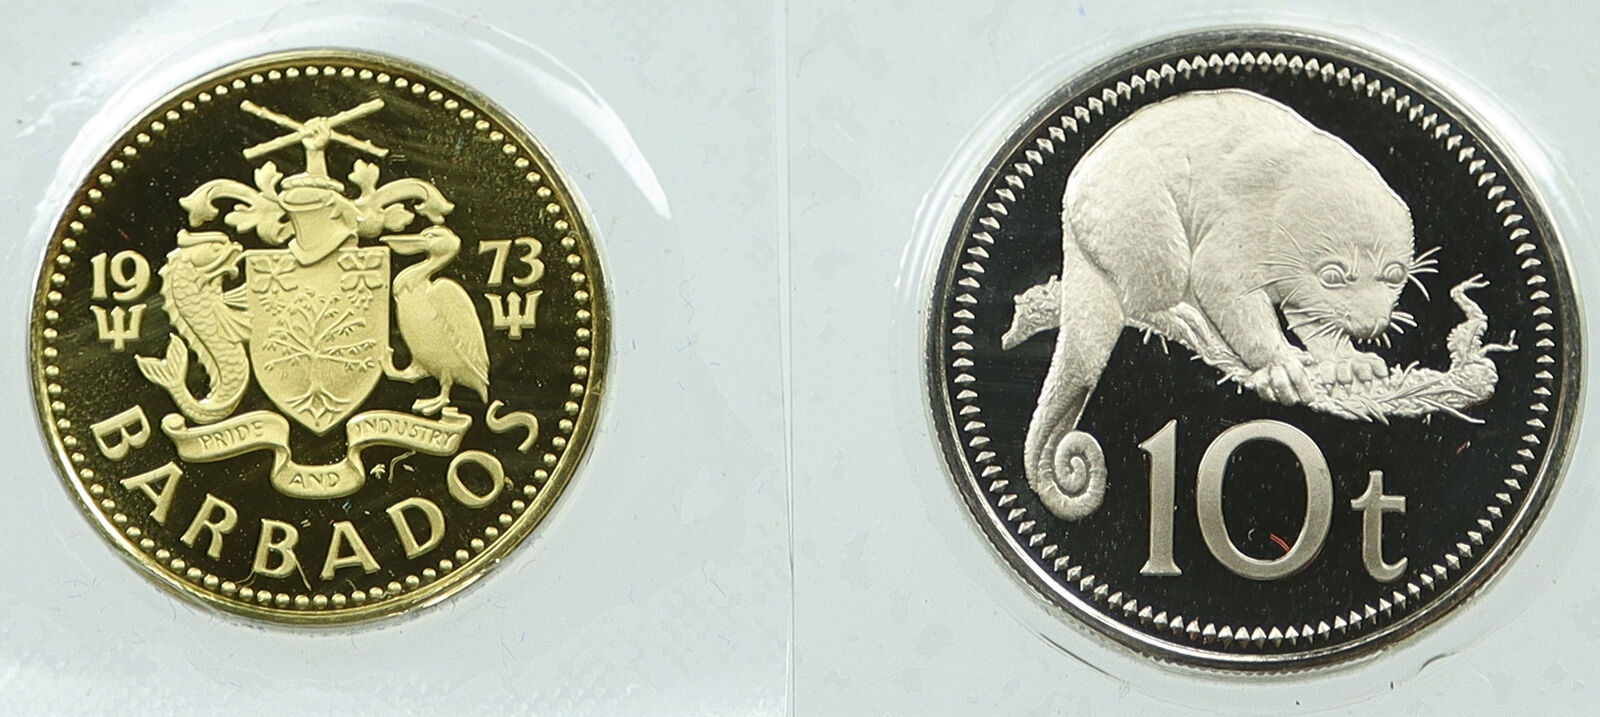 PAPUA NEW GUINEA & BARBADOS 10 Tala & 5 Cents Proof Lot of 2 Coins GIFT i116452